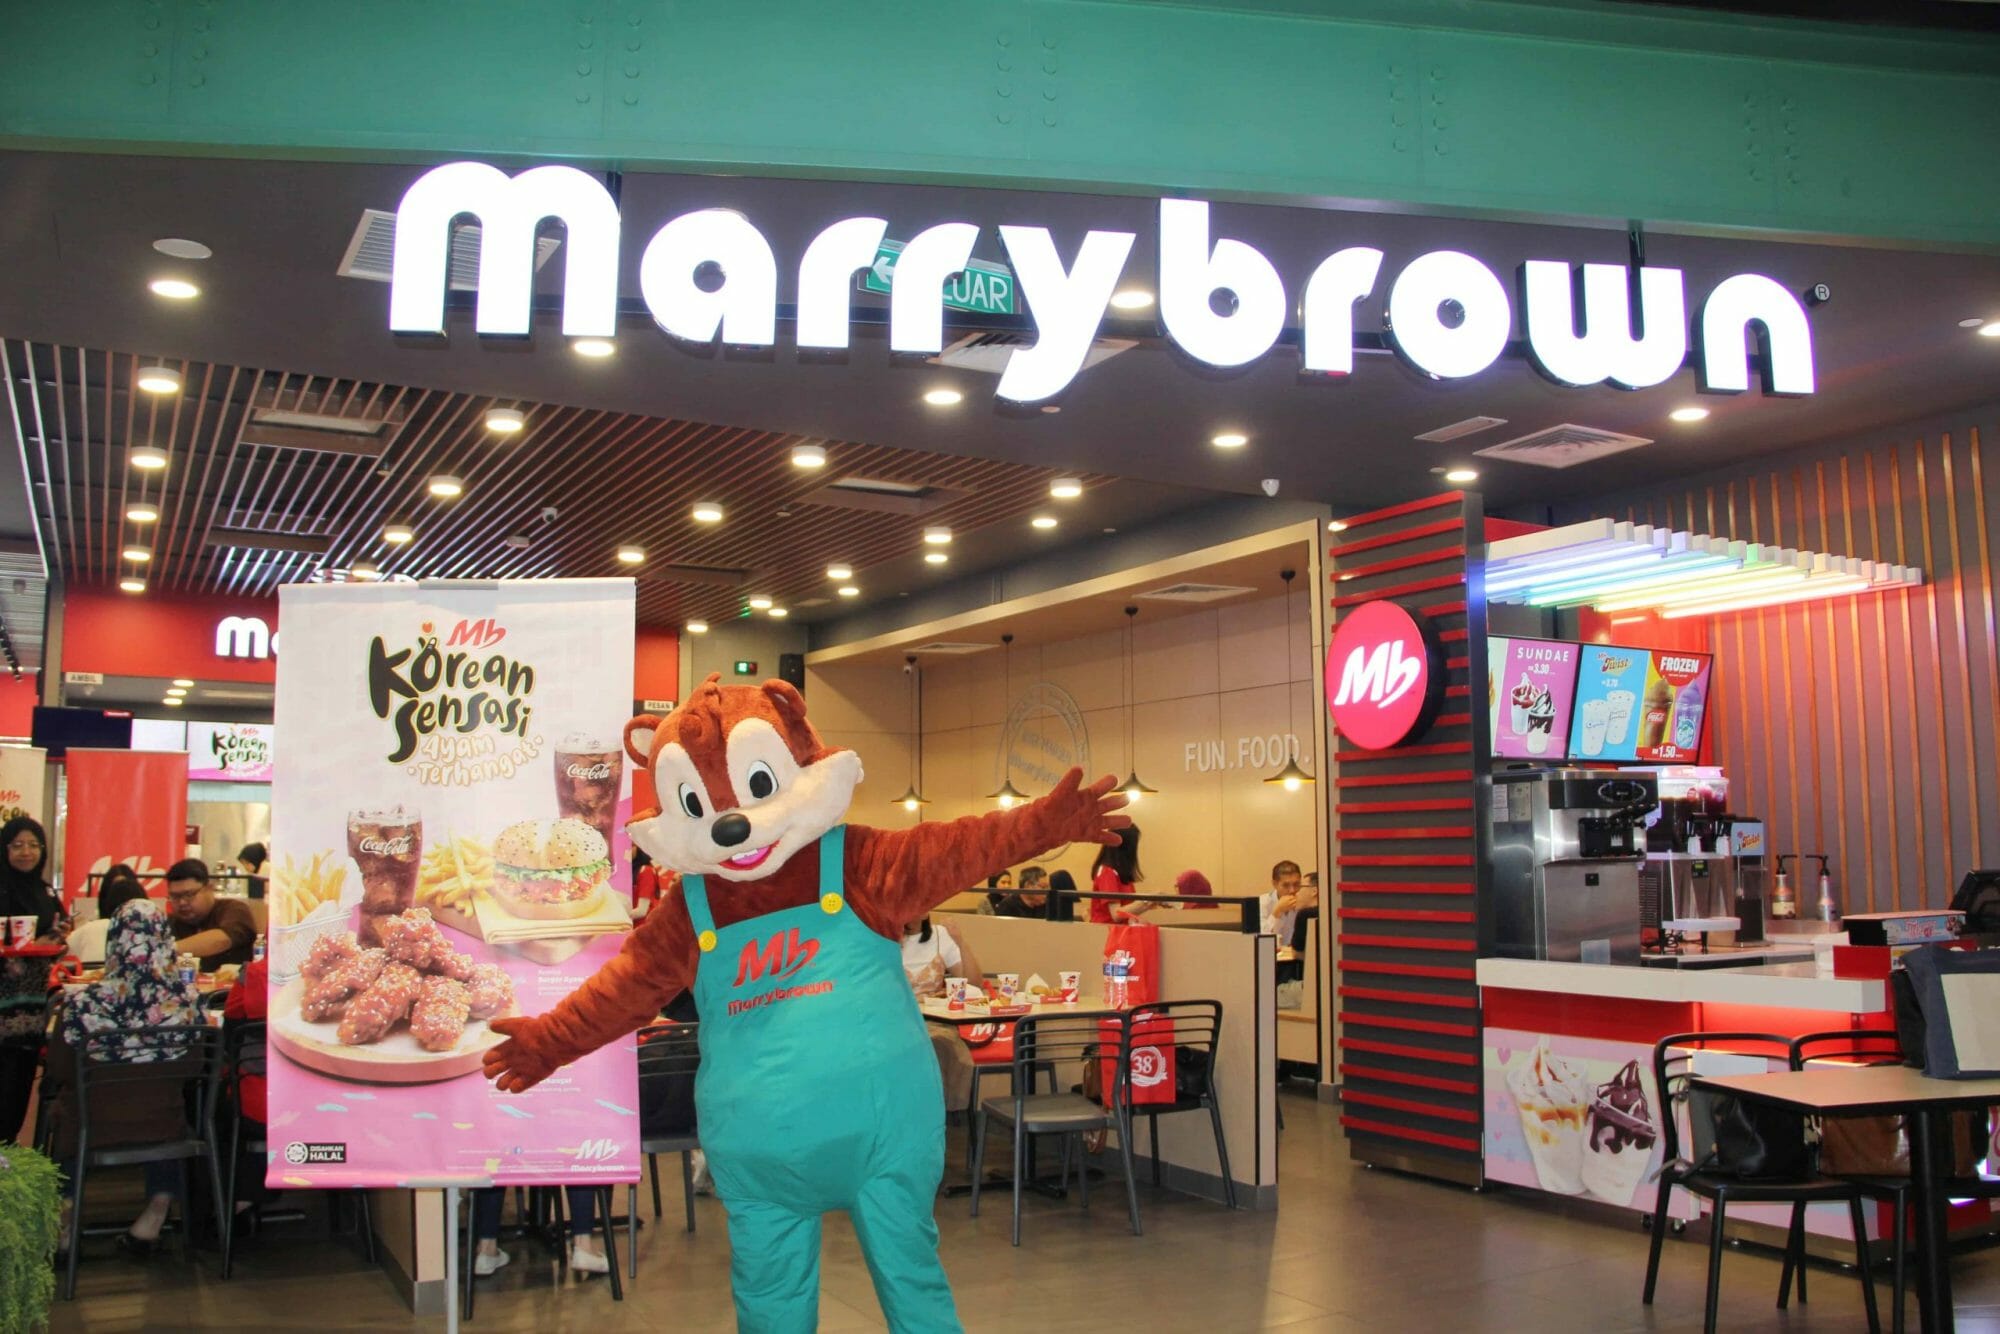 Marry brown